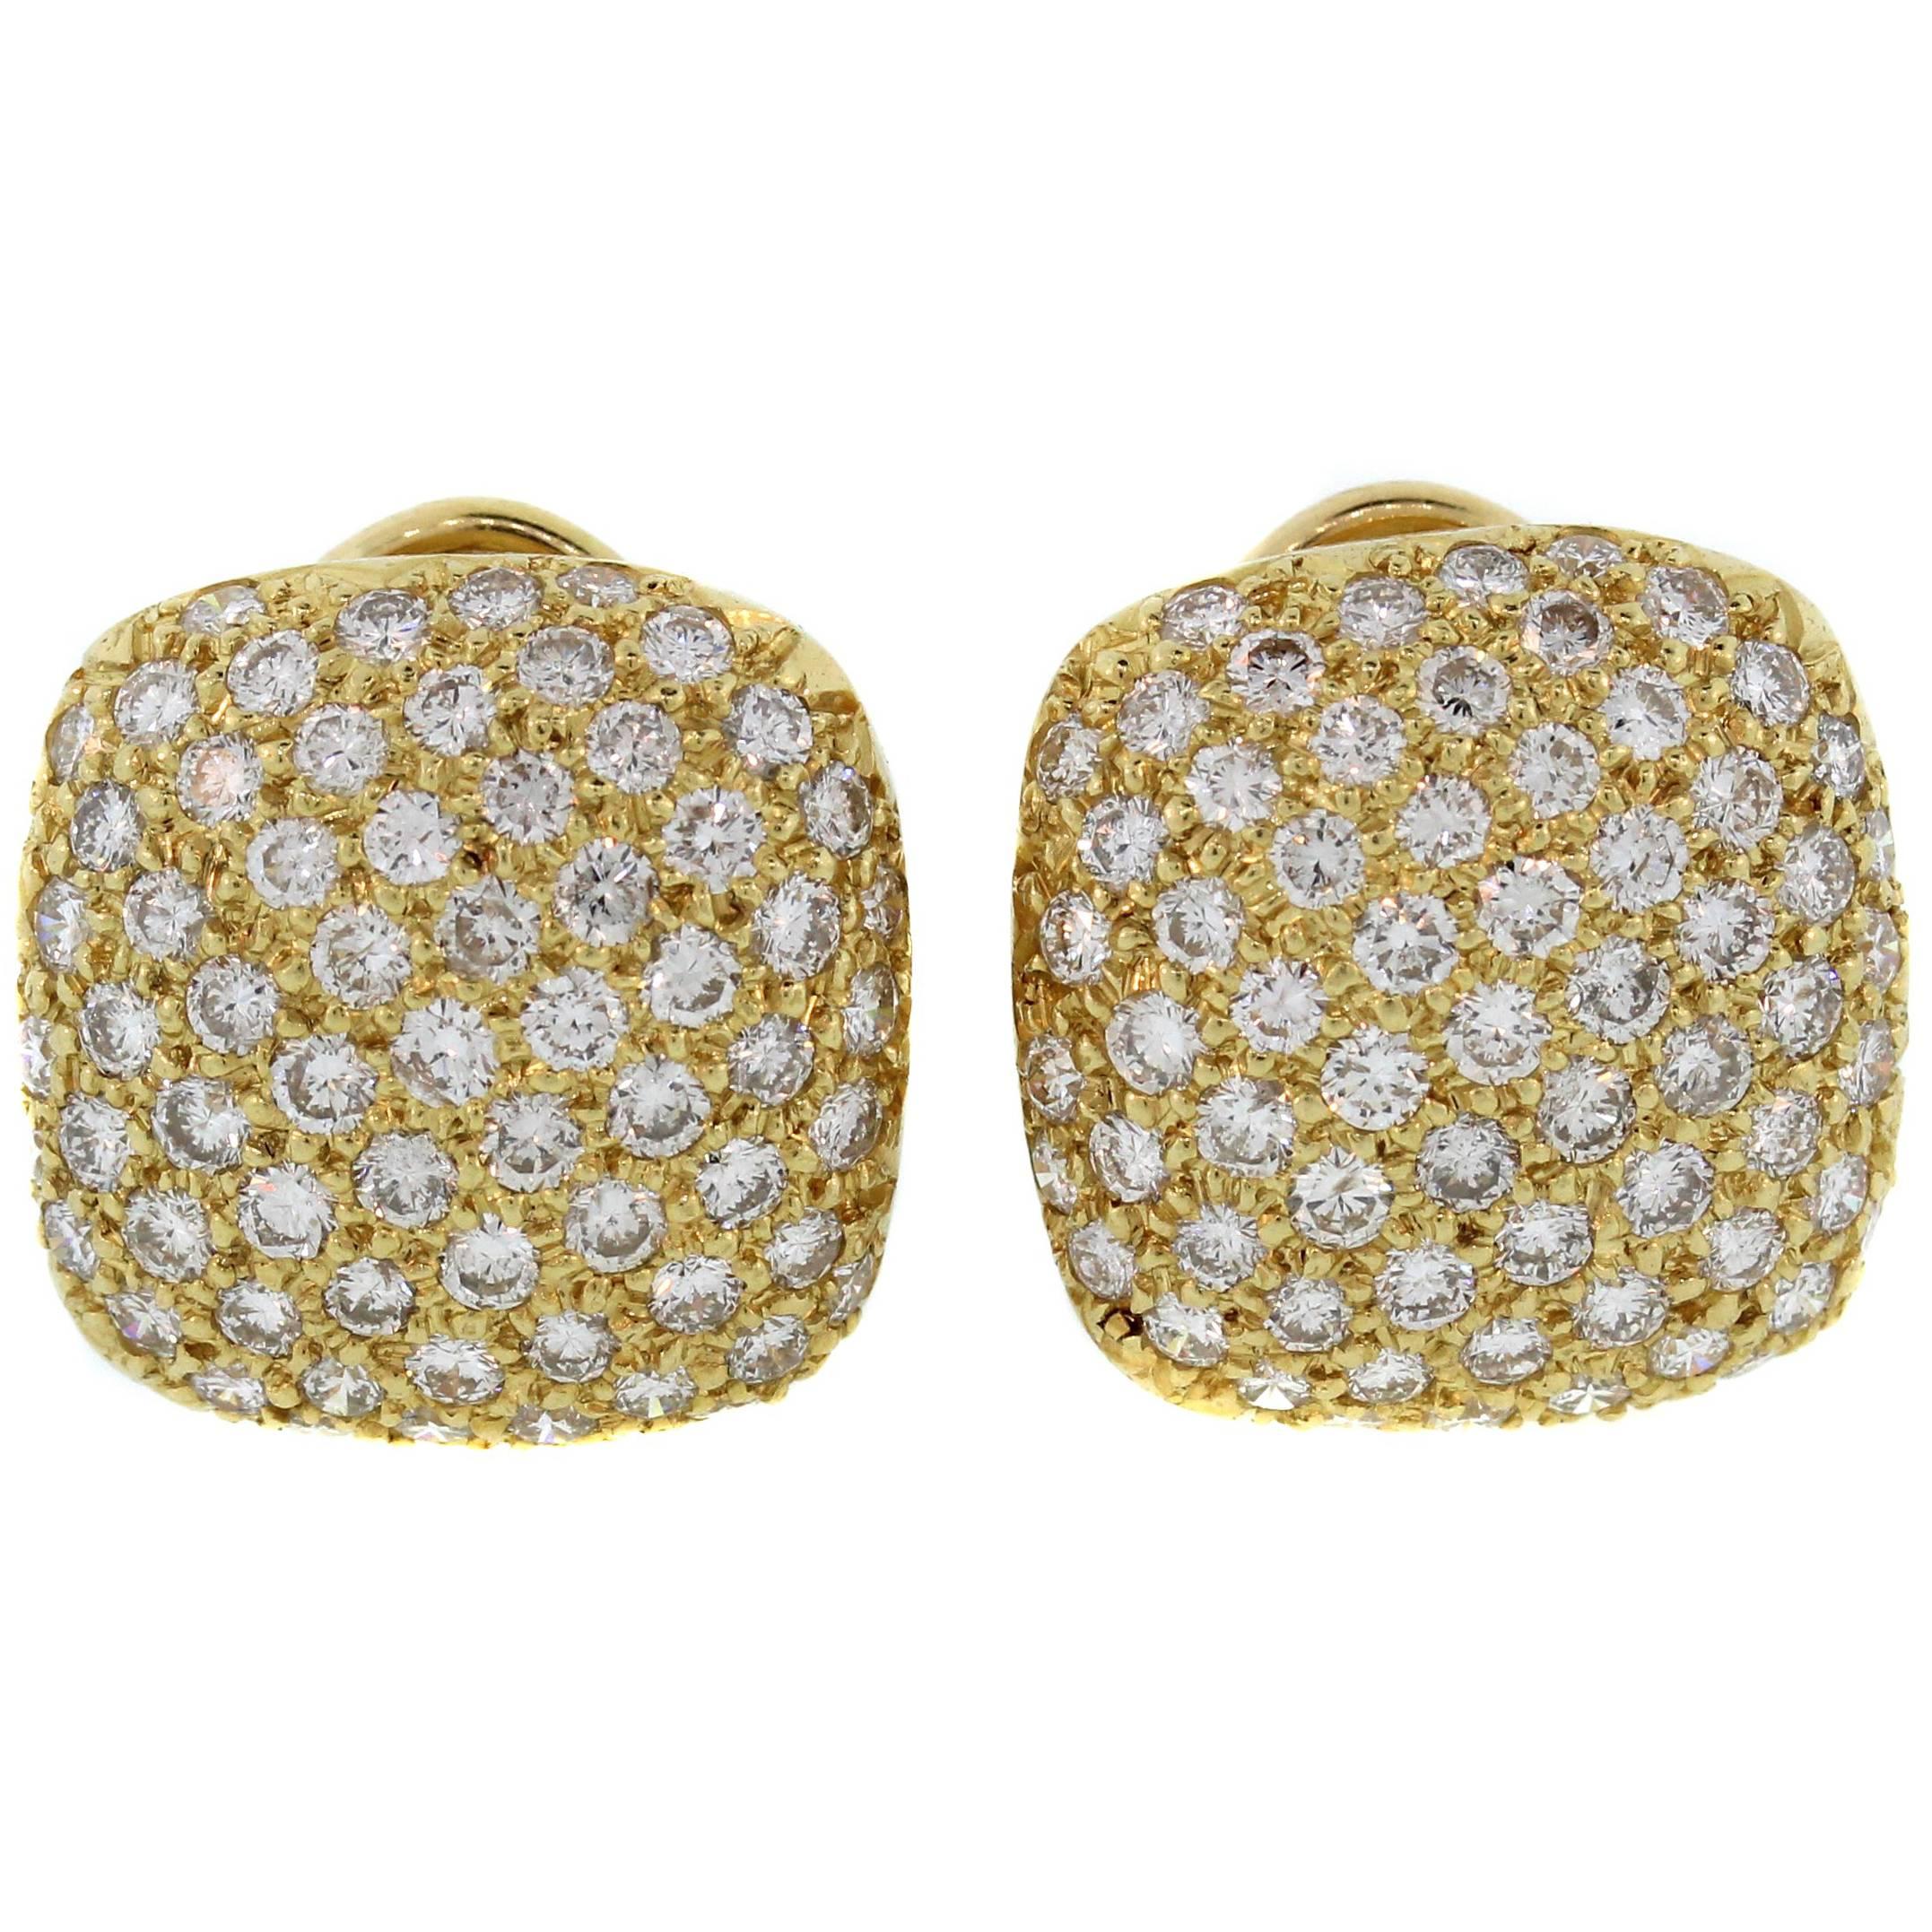 Yellow Gold and Diamond Square Earrings